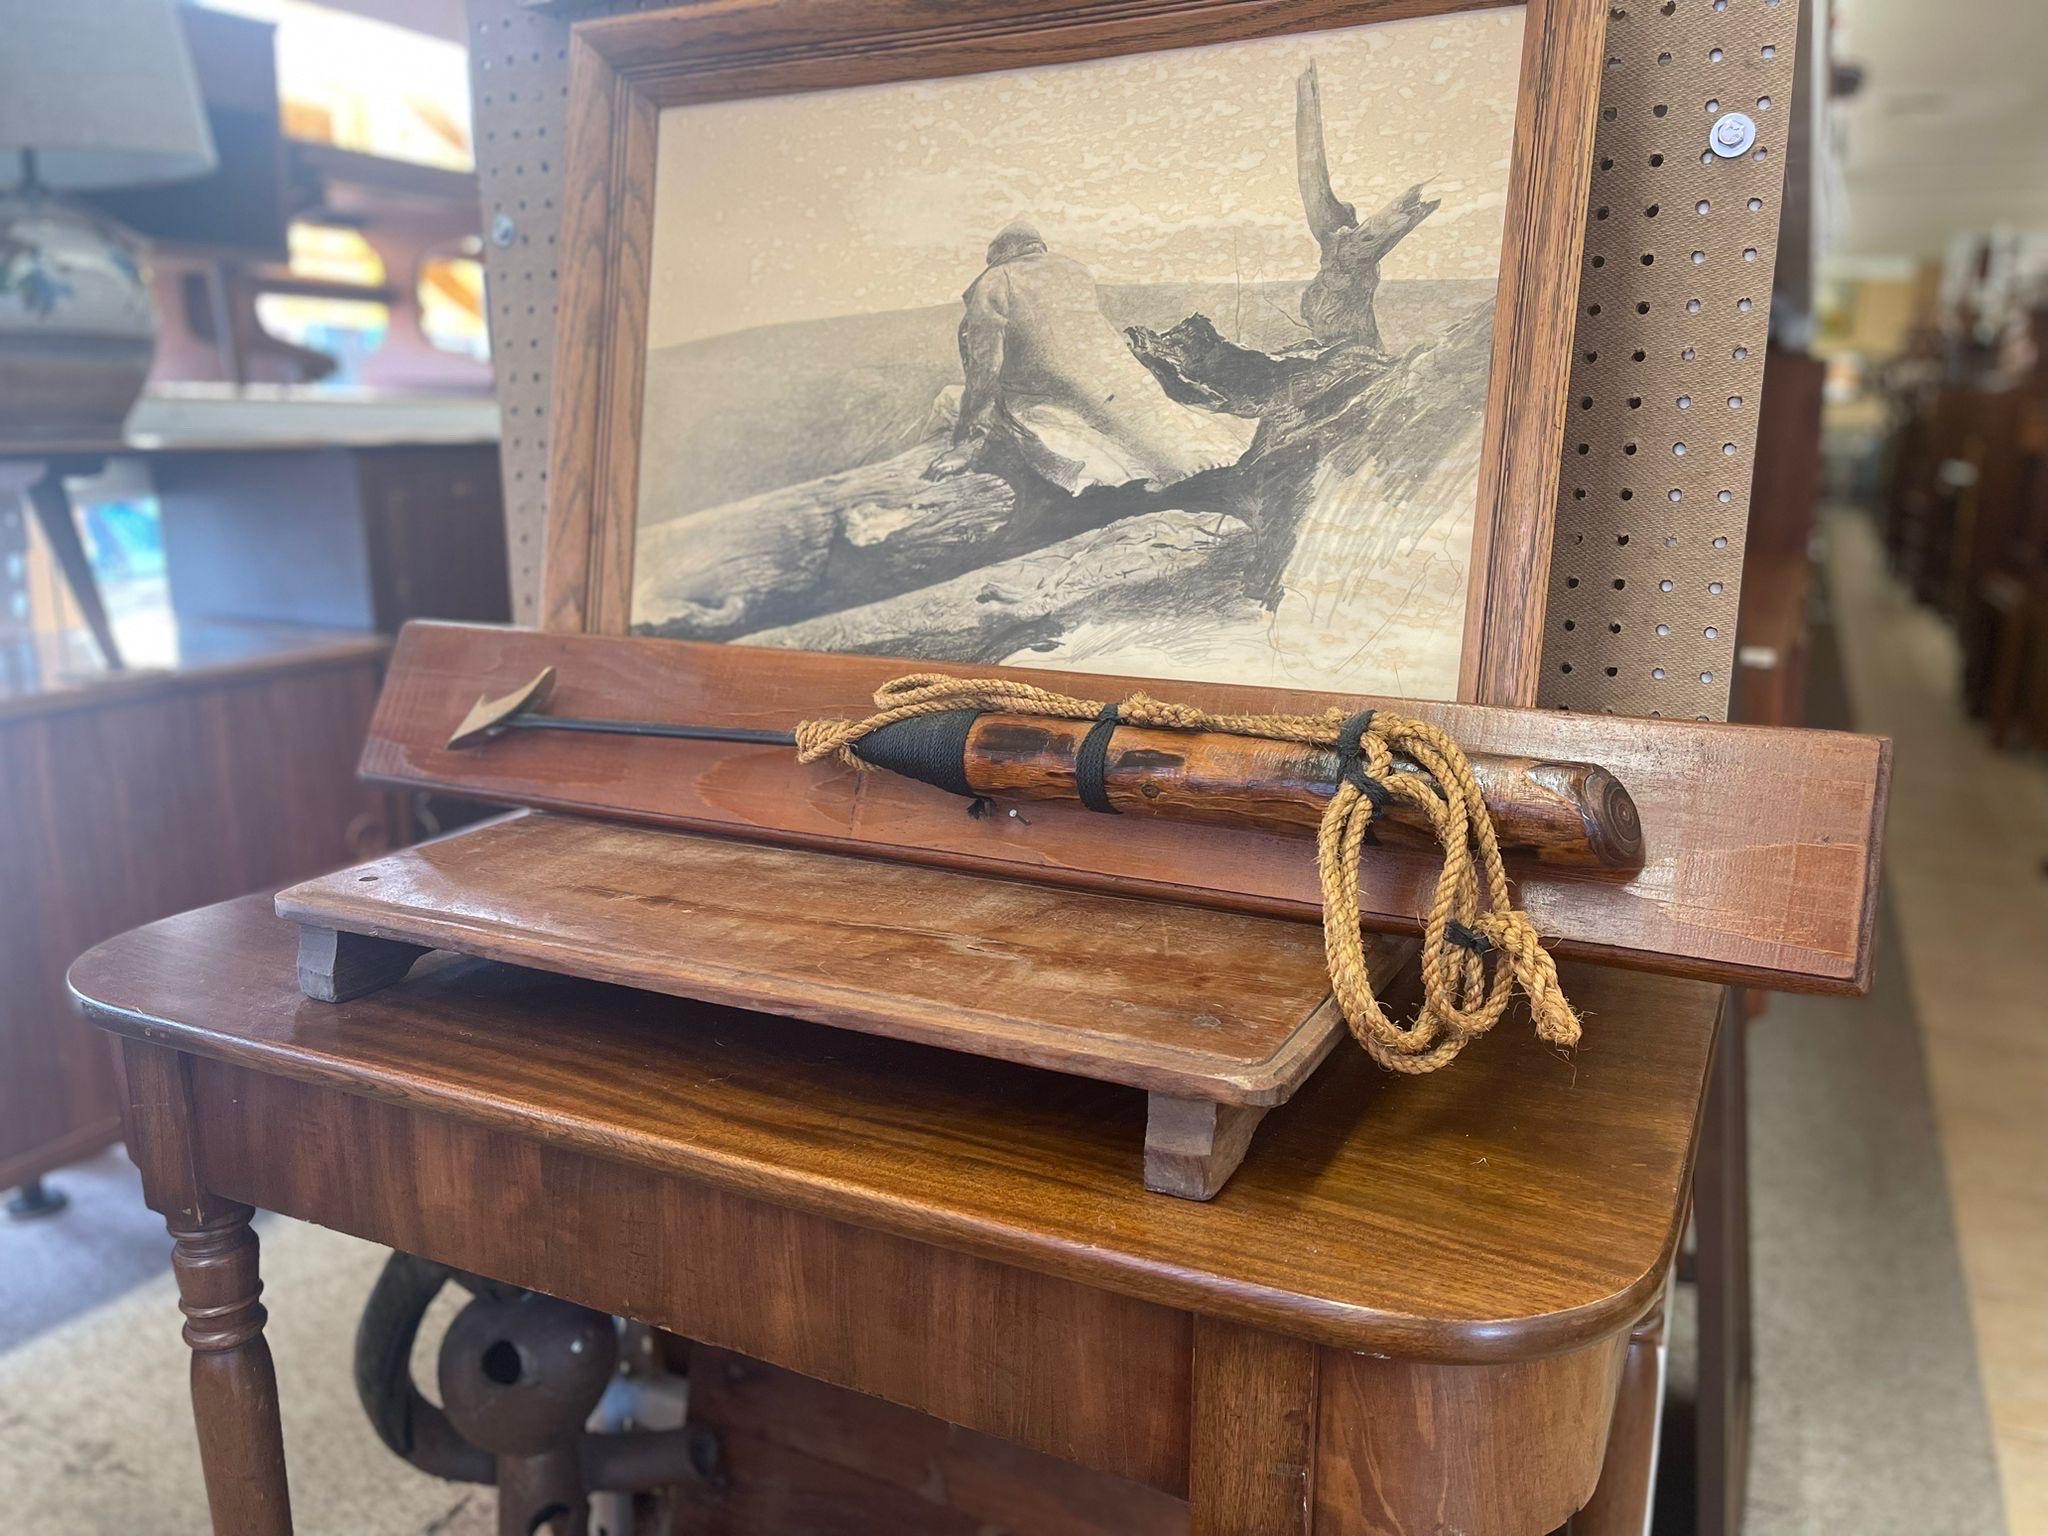 Vintage whaling harpoon on wood Backing, ready to be hung on the wall. Rope attached. Vintage Condition Consistent with Age as Pictured.

Dimensions. 38 W ; 5 D ; 1 H